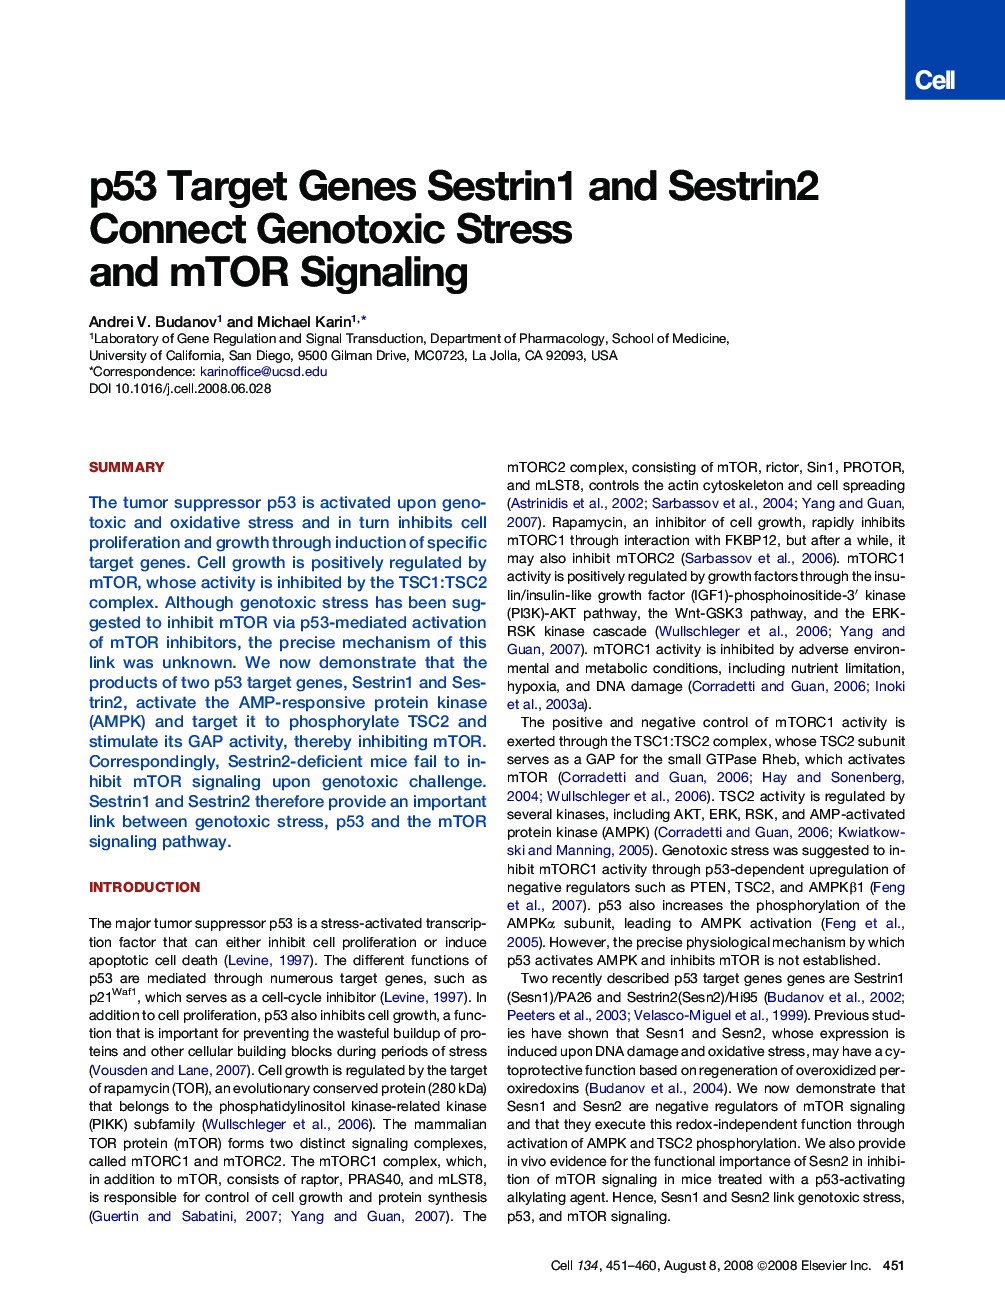 p53 Target Genes Sestrin1 and Sestrin2 Connect Genotoxic Stress and mTOR Signaling